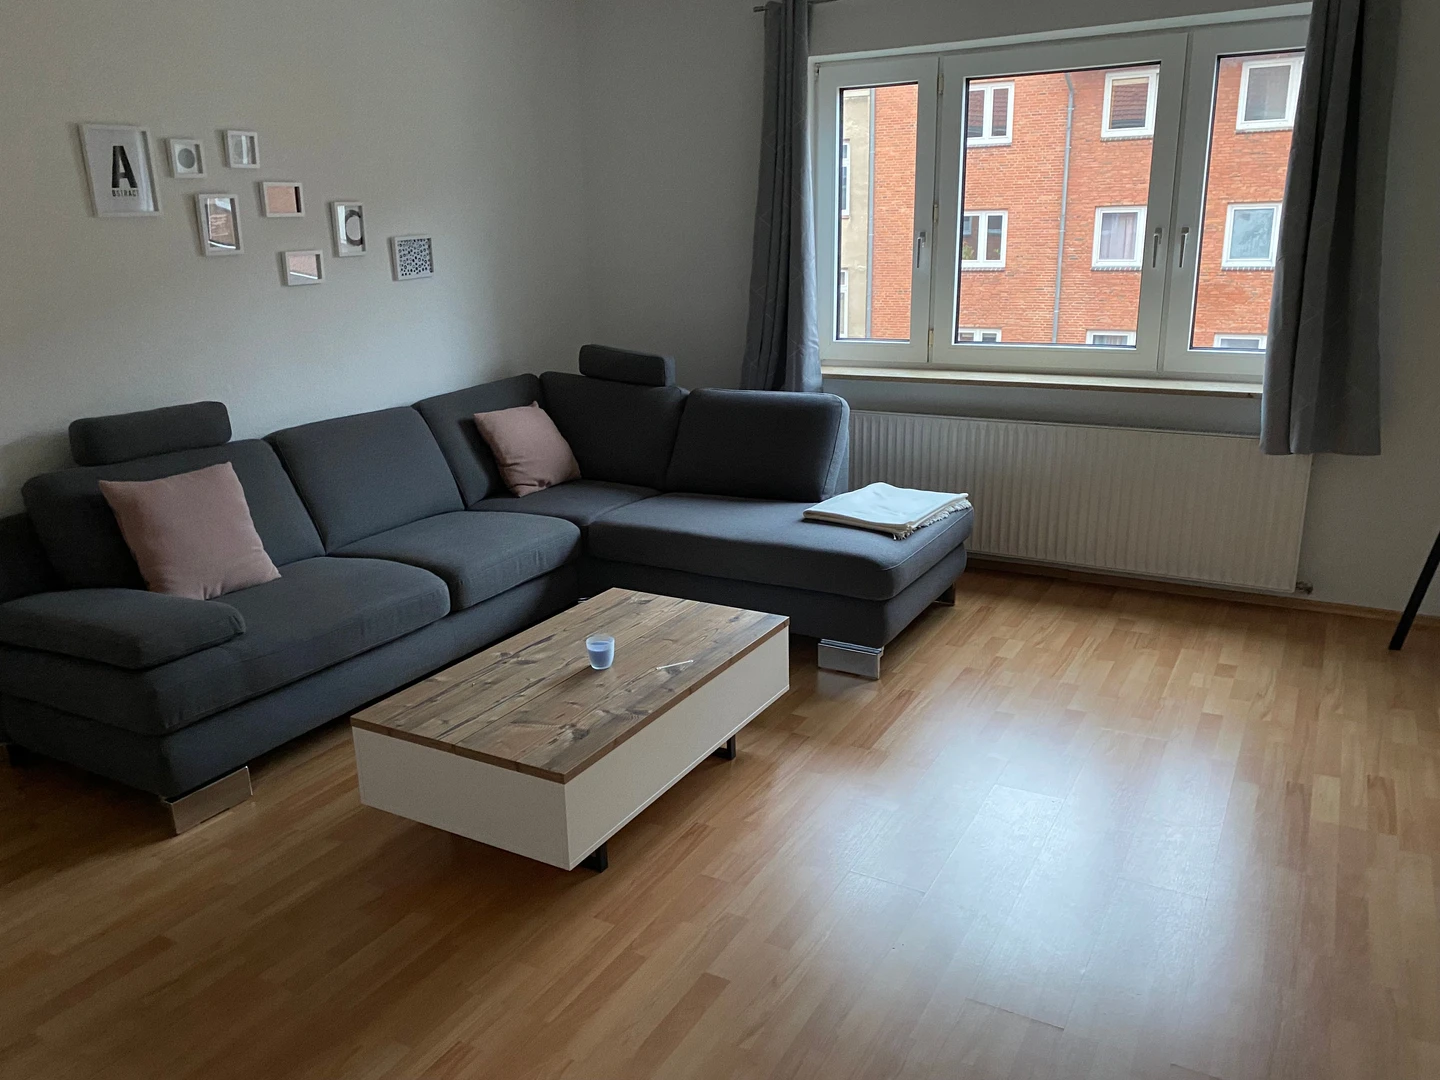 Room for rent in a shared flat in Kiel